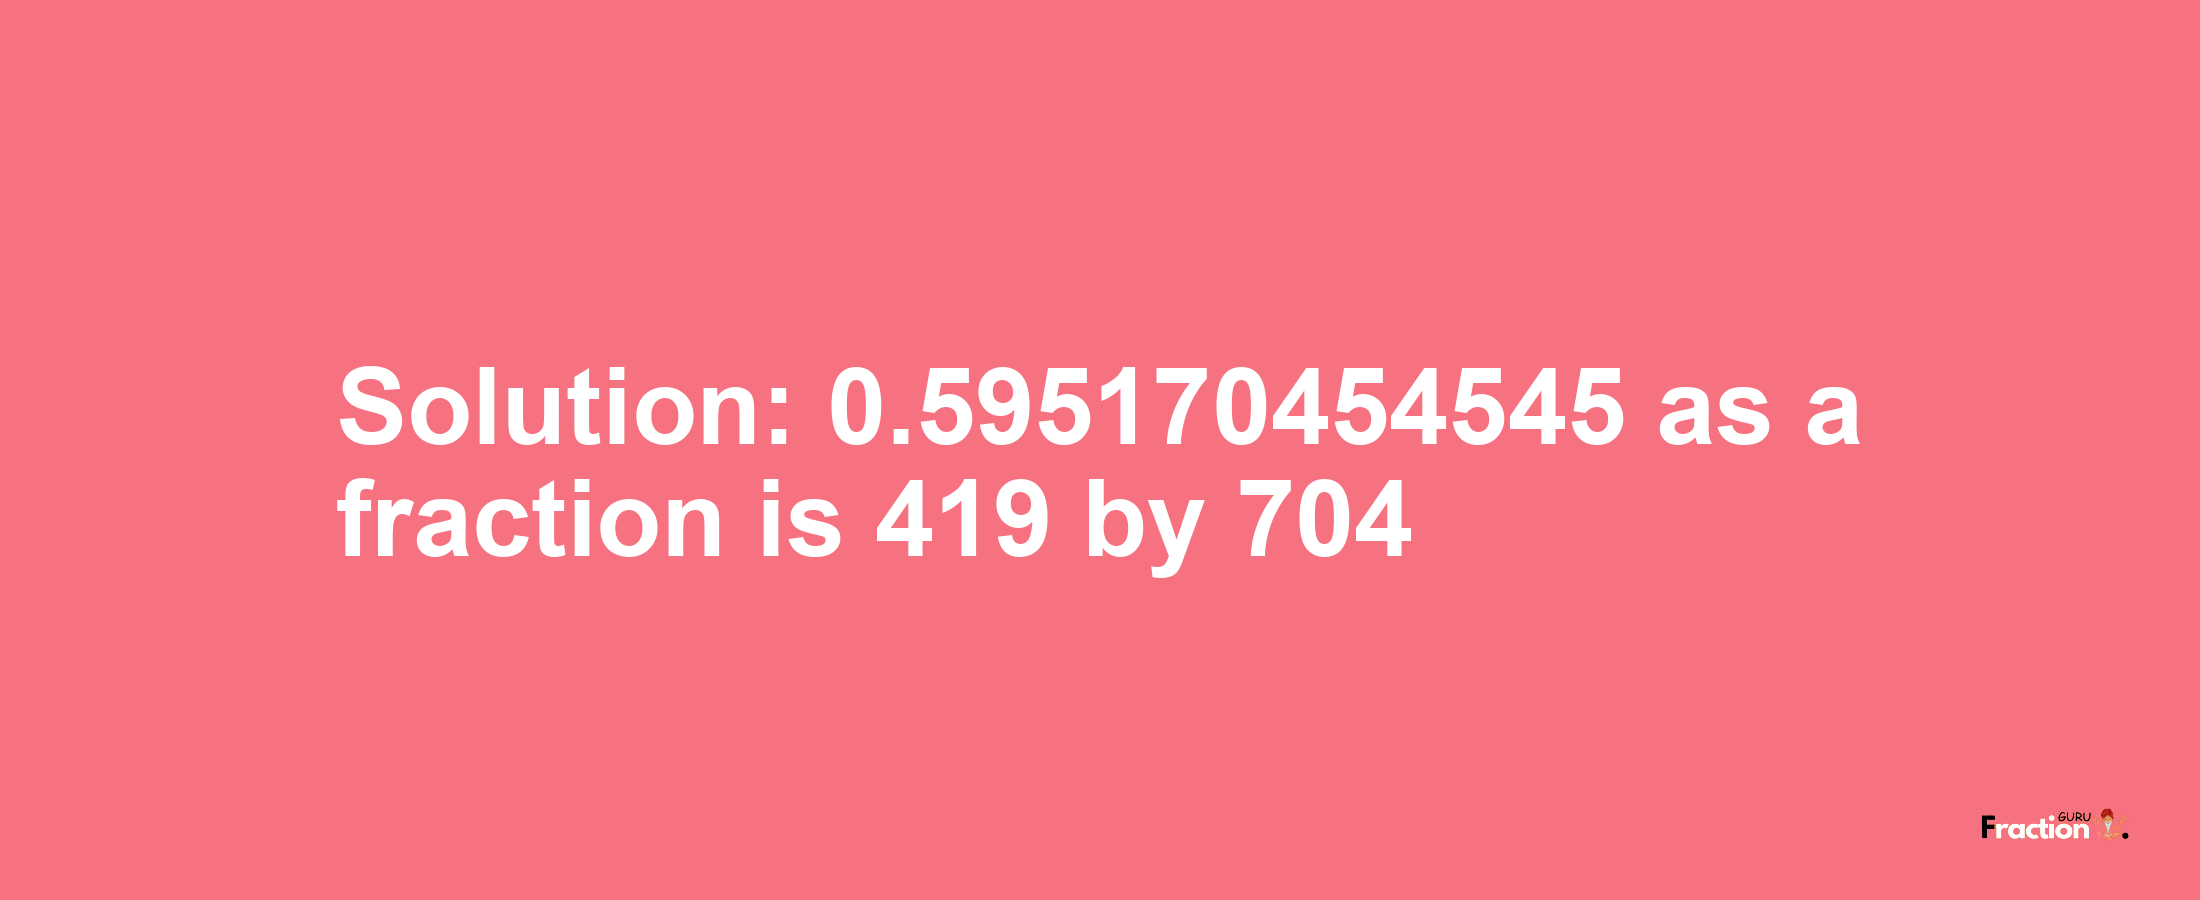 Solution:0.595170454545 as a fraction is 419/704